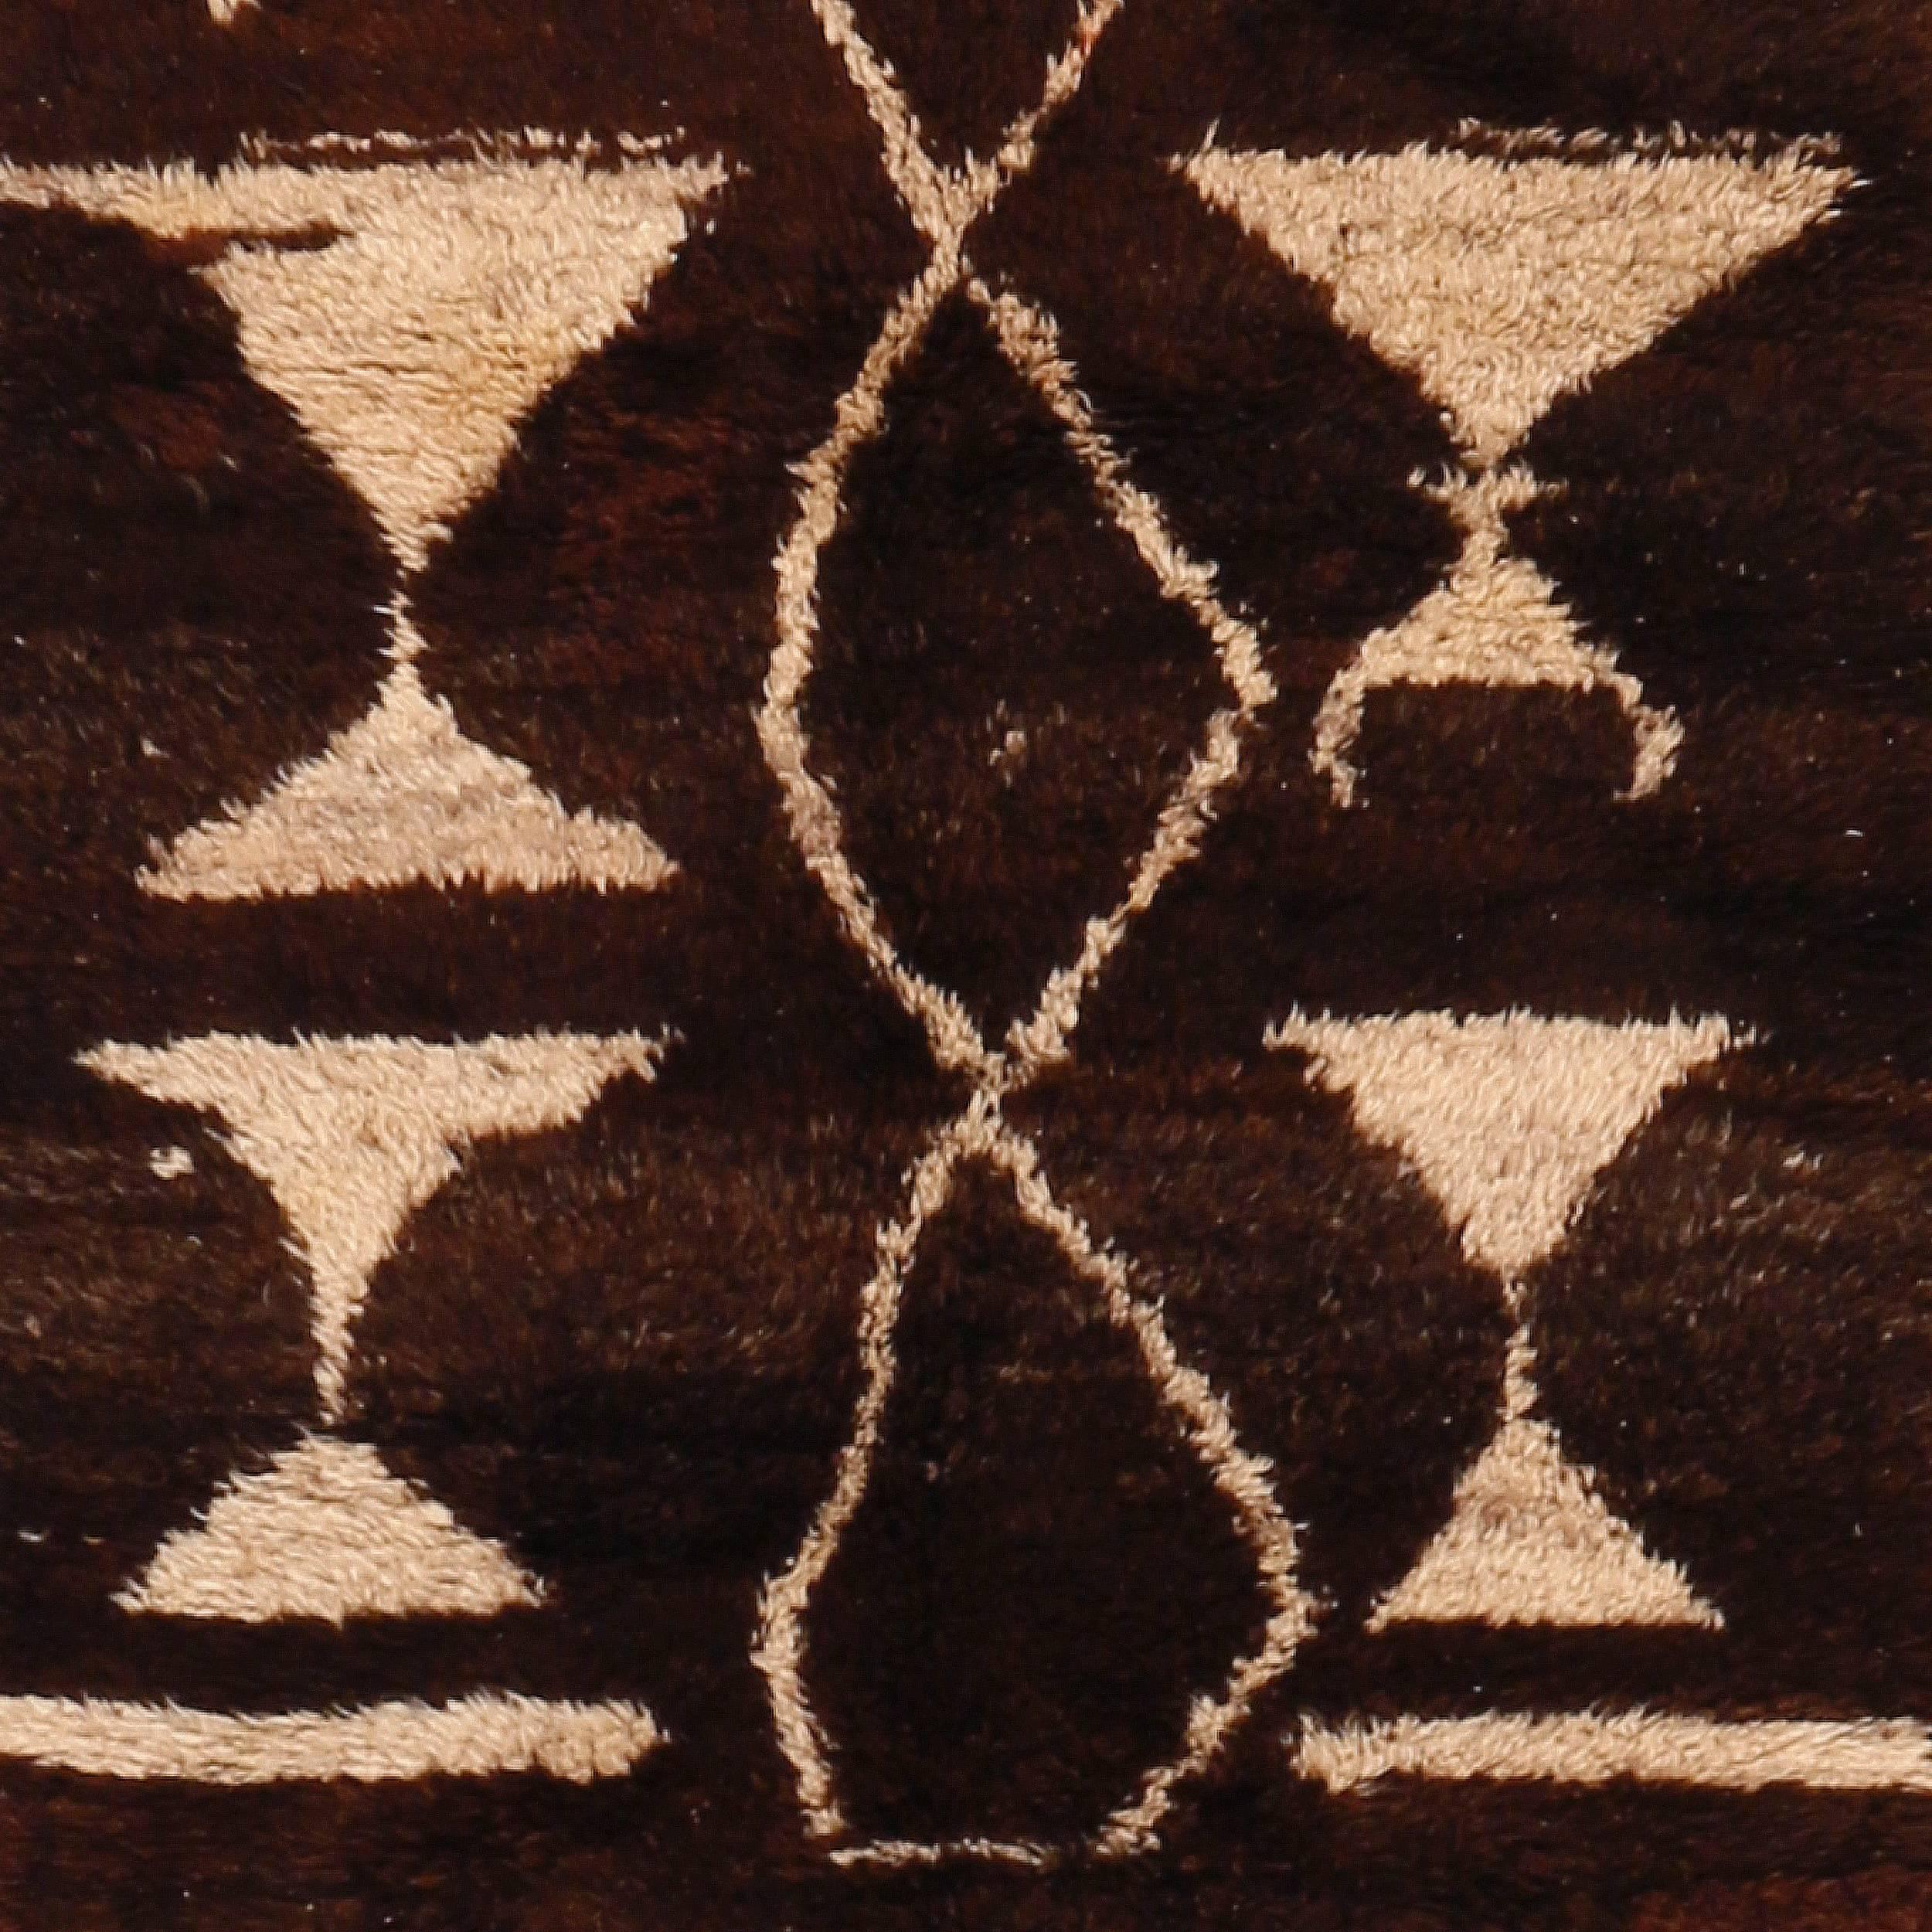 A highly unusual Tulu woven with natural, undyed mocha brown and ivory wool, resulting in a weaving with a markedly 'Art Deco' flavor. Tulu rugs display a primitive quality that makes them ideal complements to Modernist interiors. Their sparse